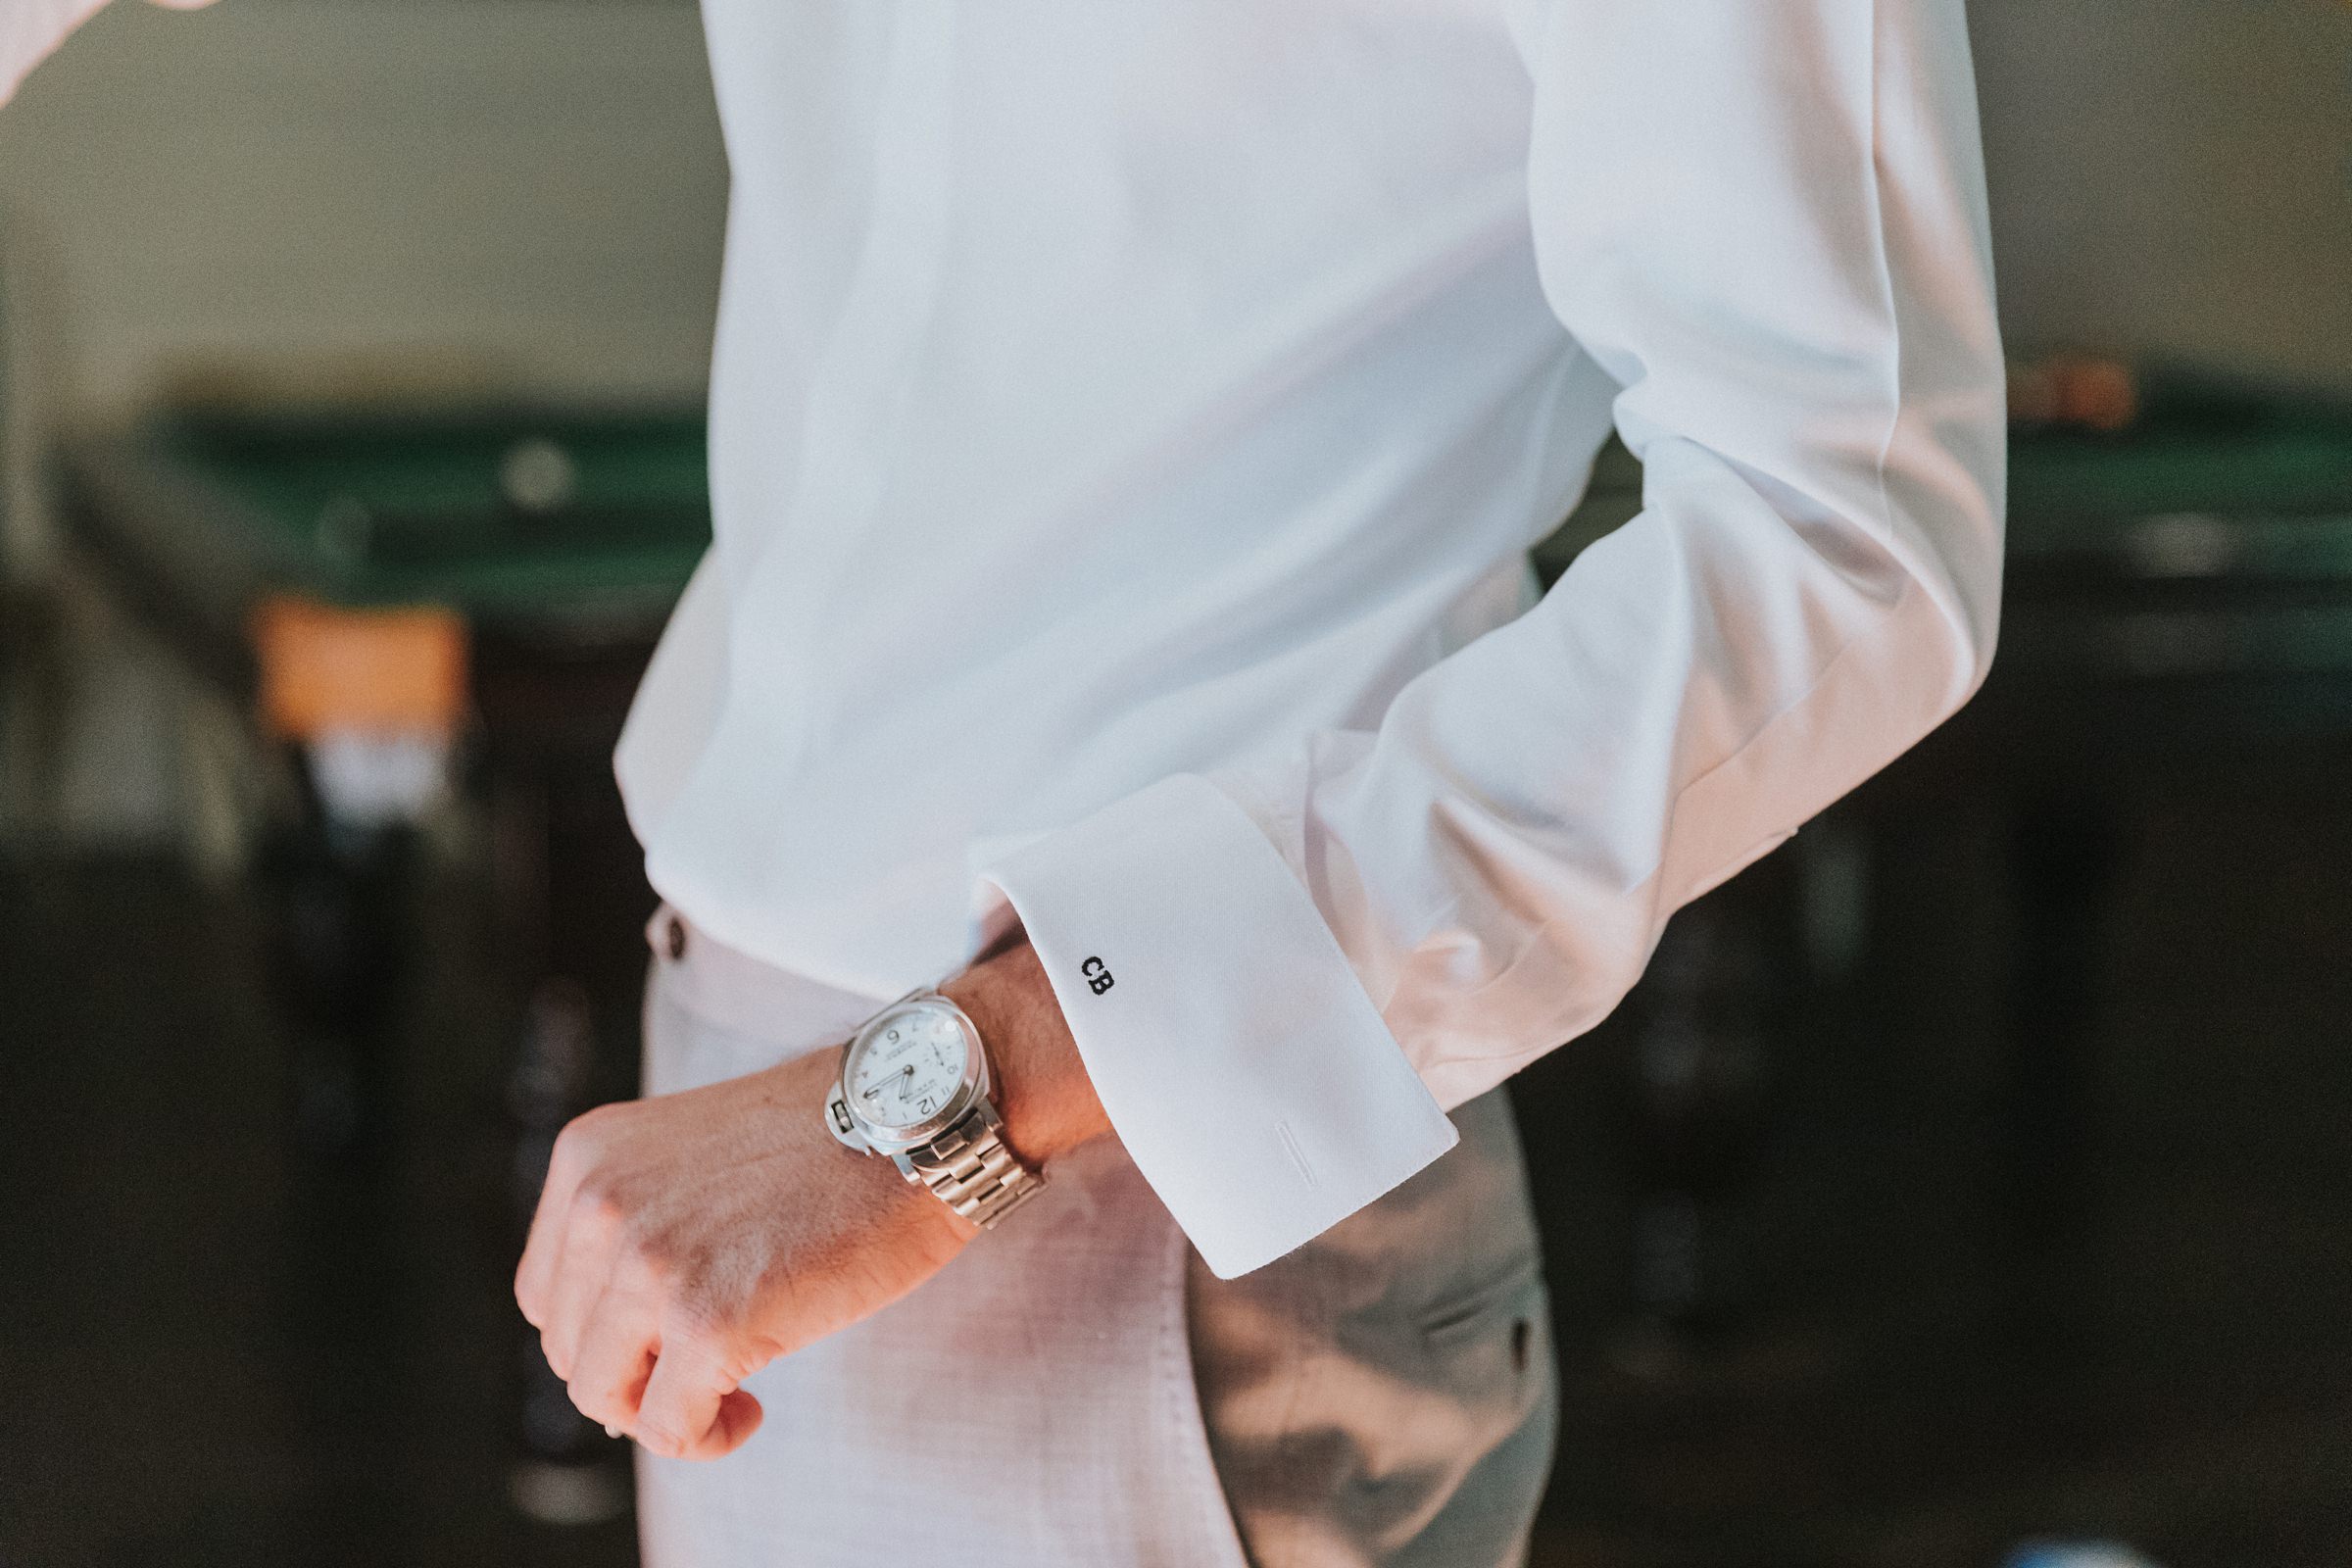 wedding shirt details with initials embroidered on cuff